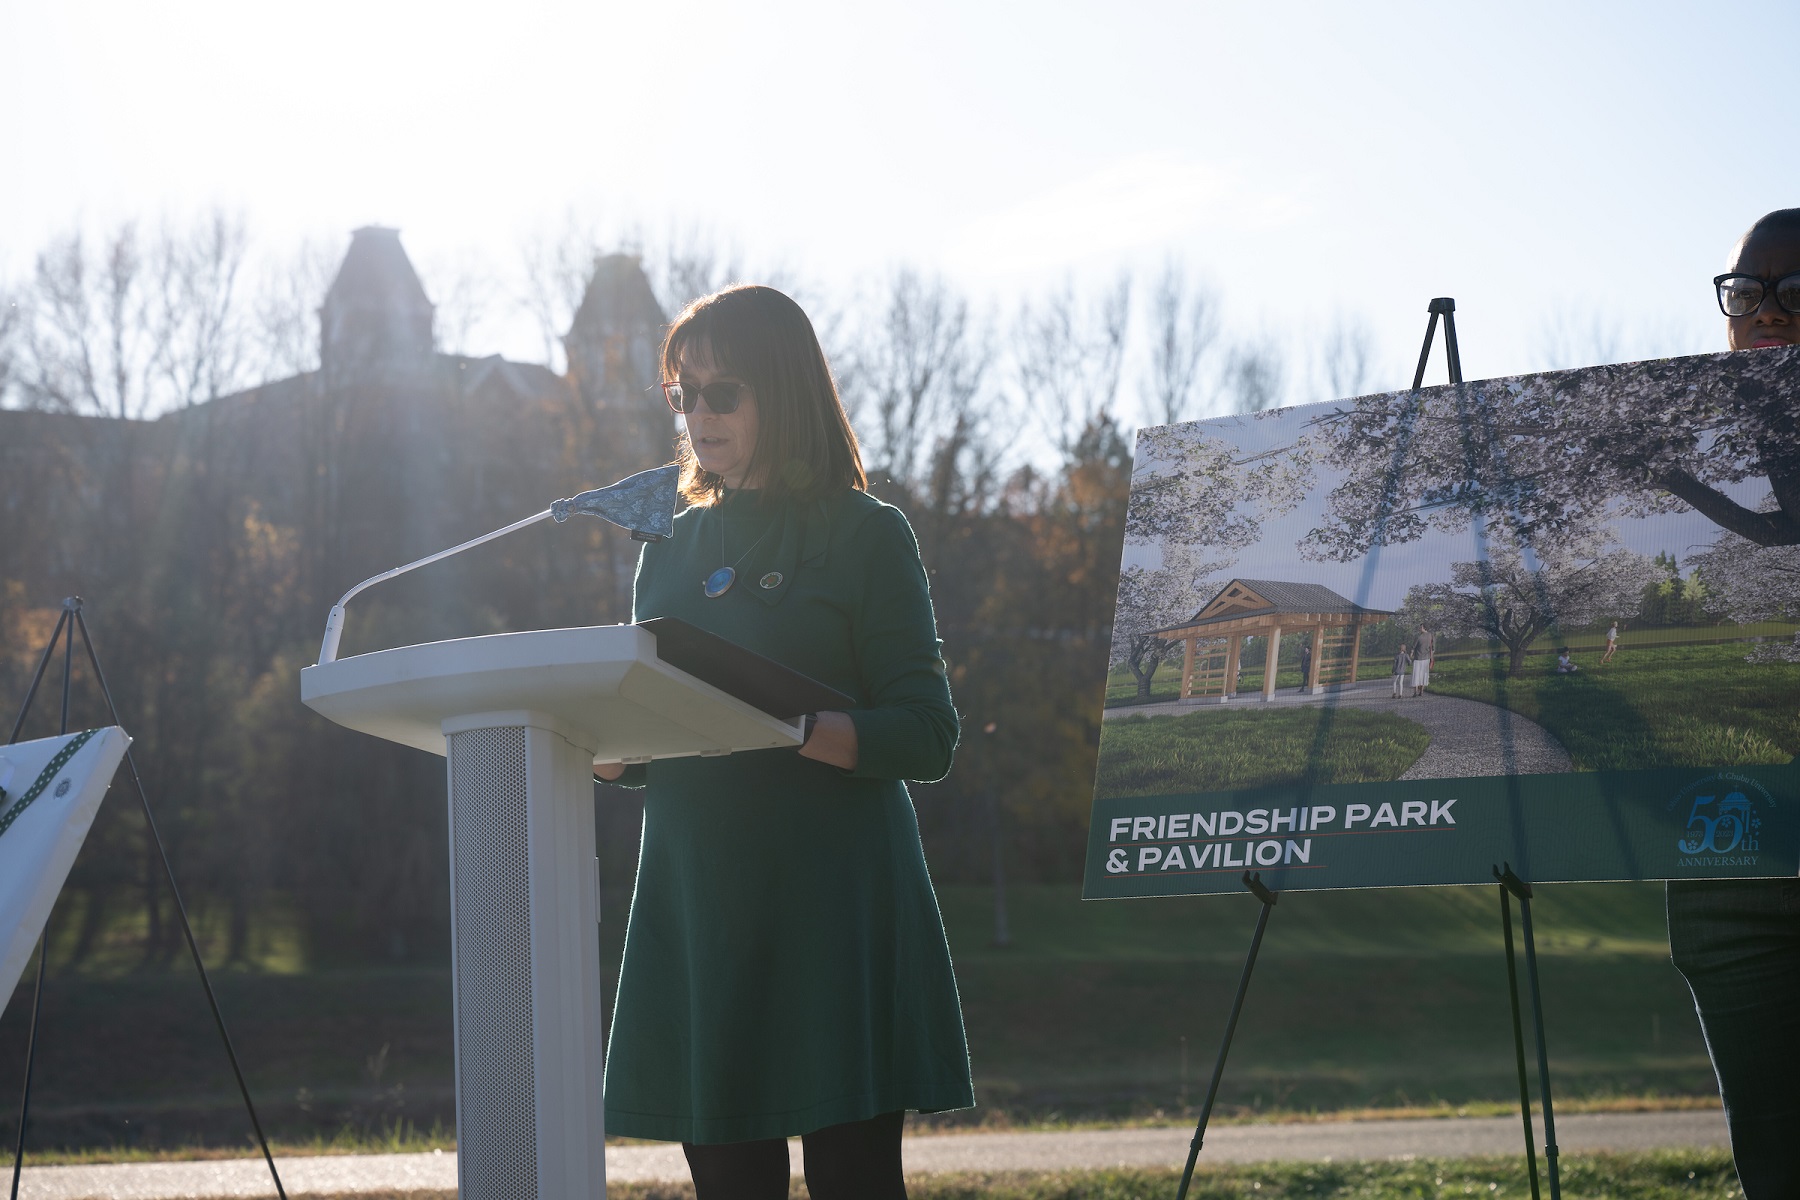 Gillian Ice is shown giving remarks near the sign for the Friendship Park and Pavilion